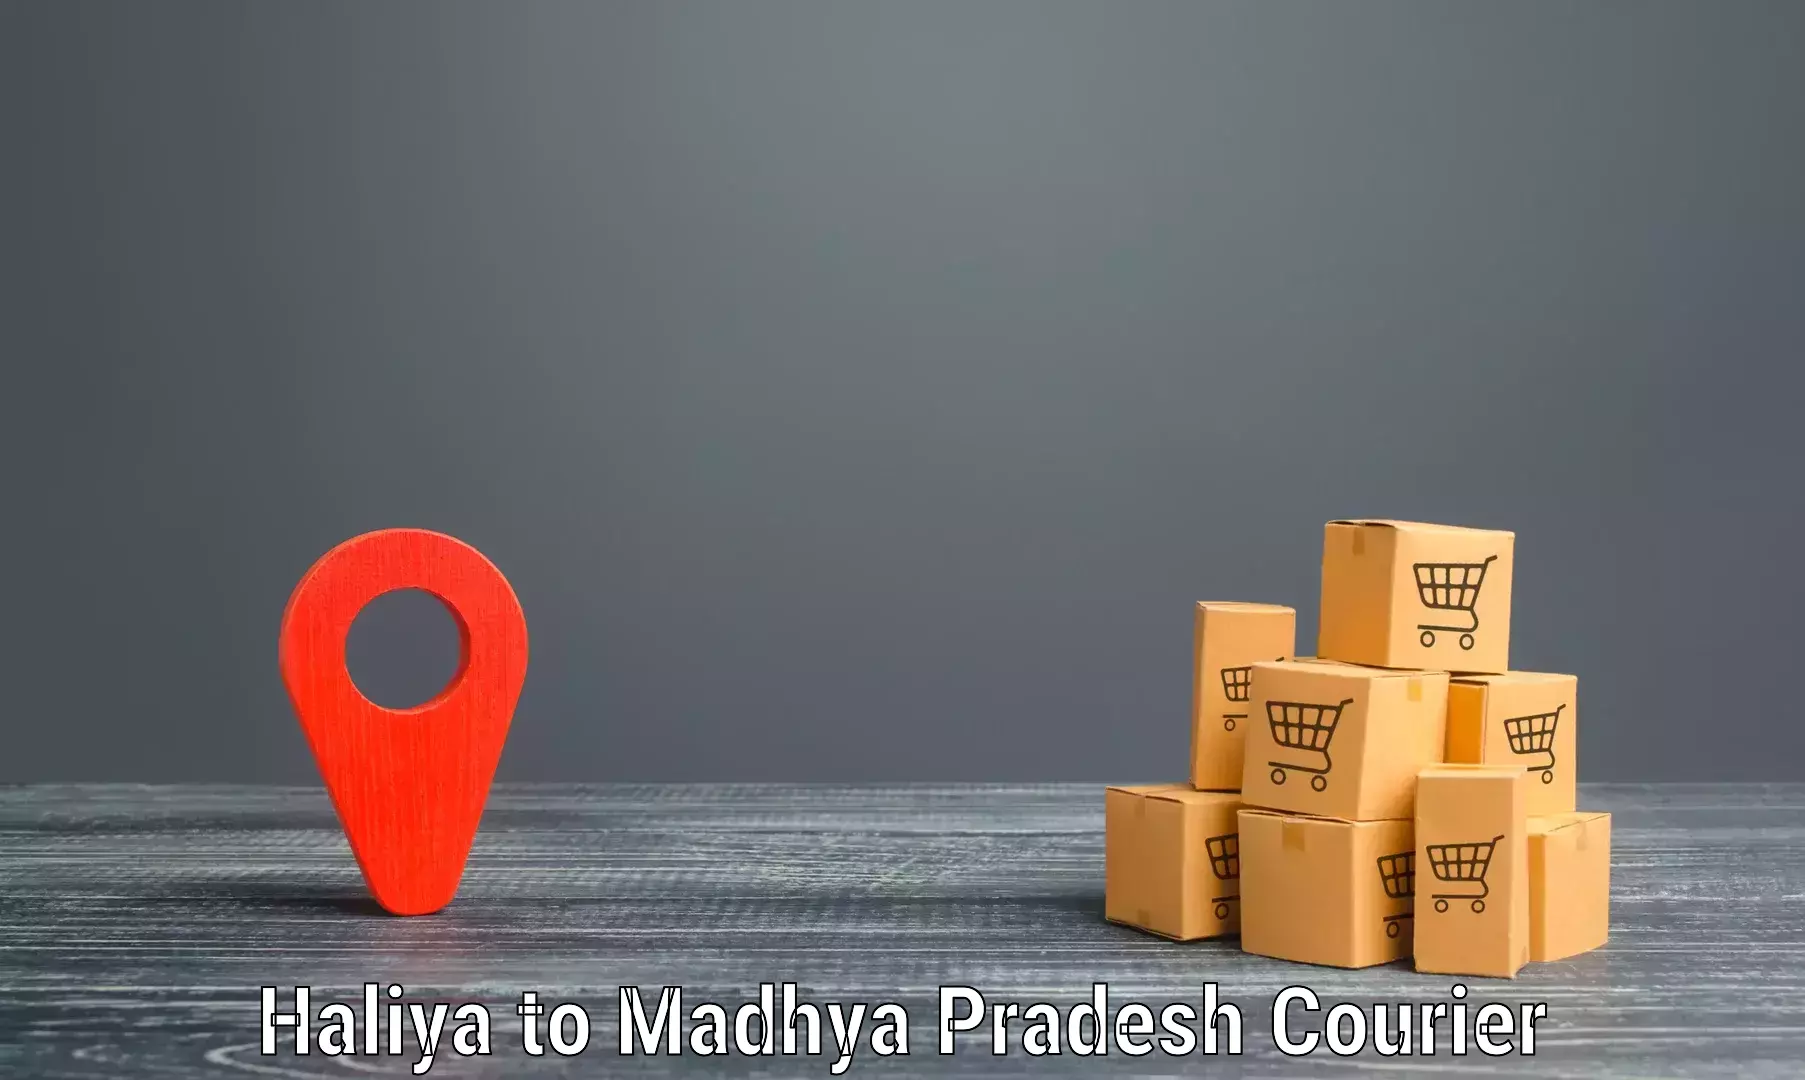 State-of-the-art courier technology Haliya to Kesali